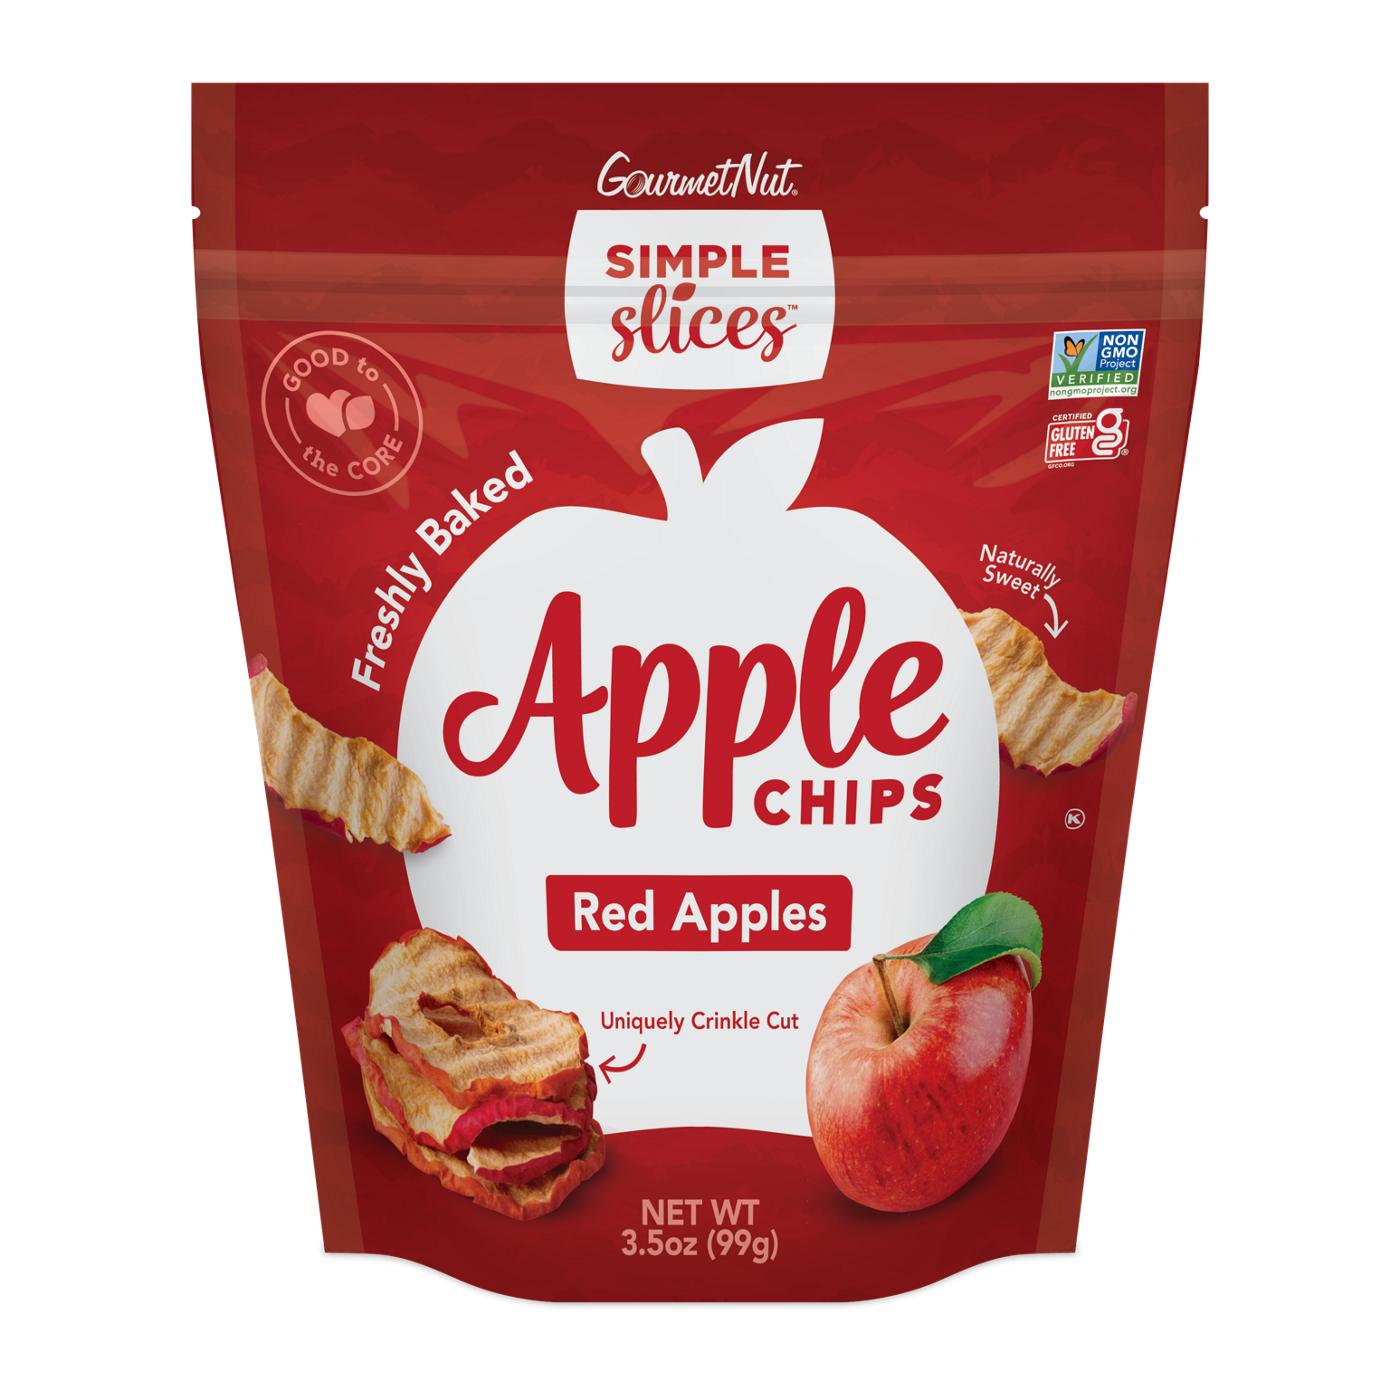 Gourmet Nut Simple Slices Apple Chips Red Apples; image 1 of 2